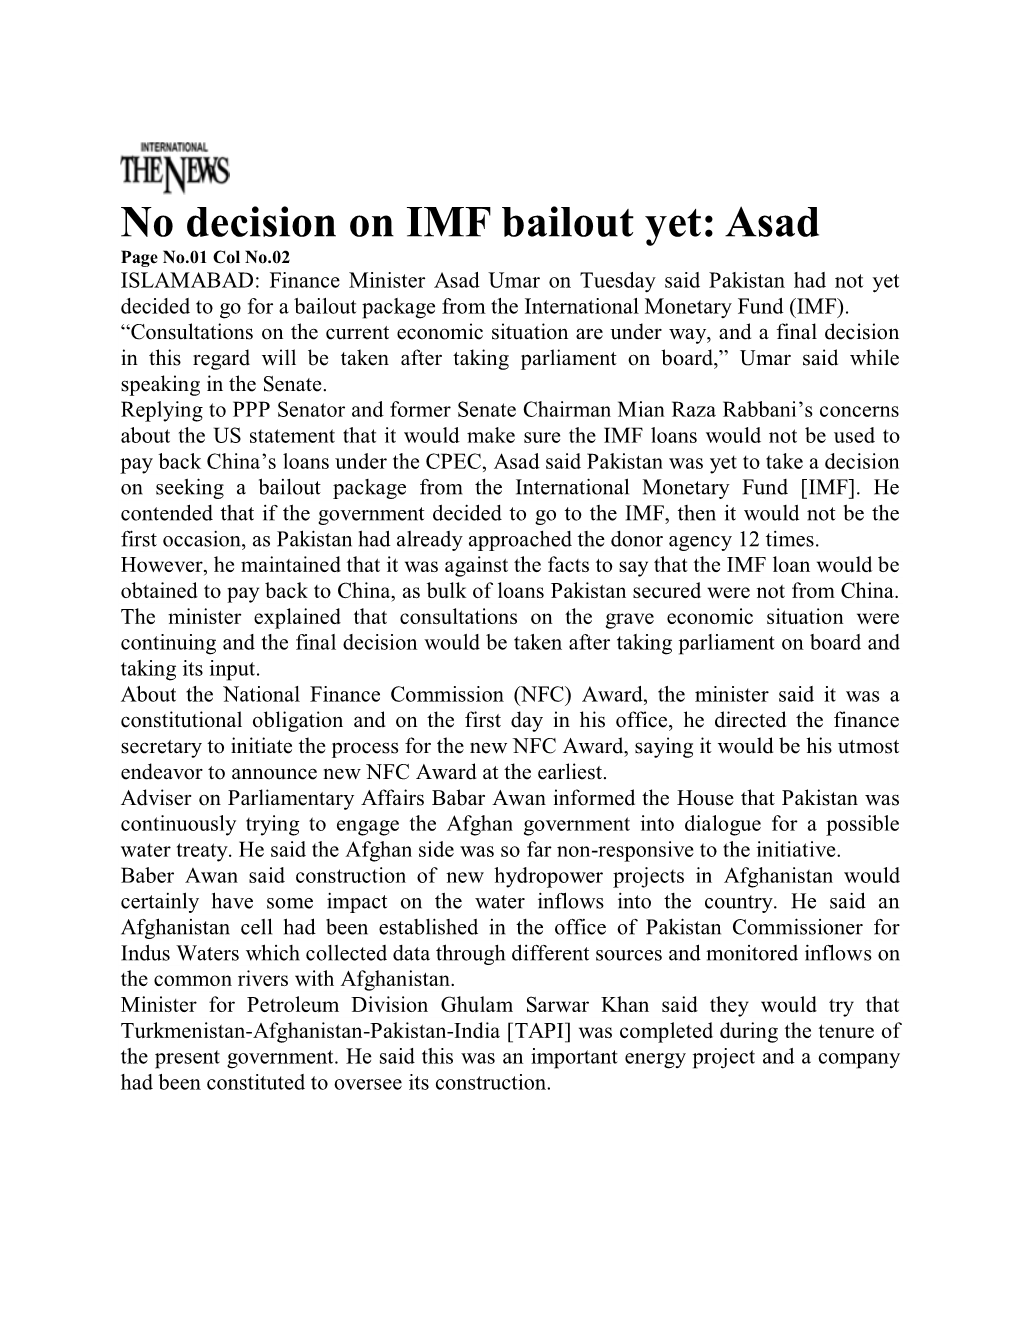 No Decision on IMF Bailout Yet: Asad